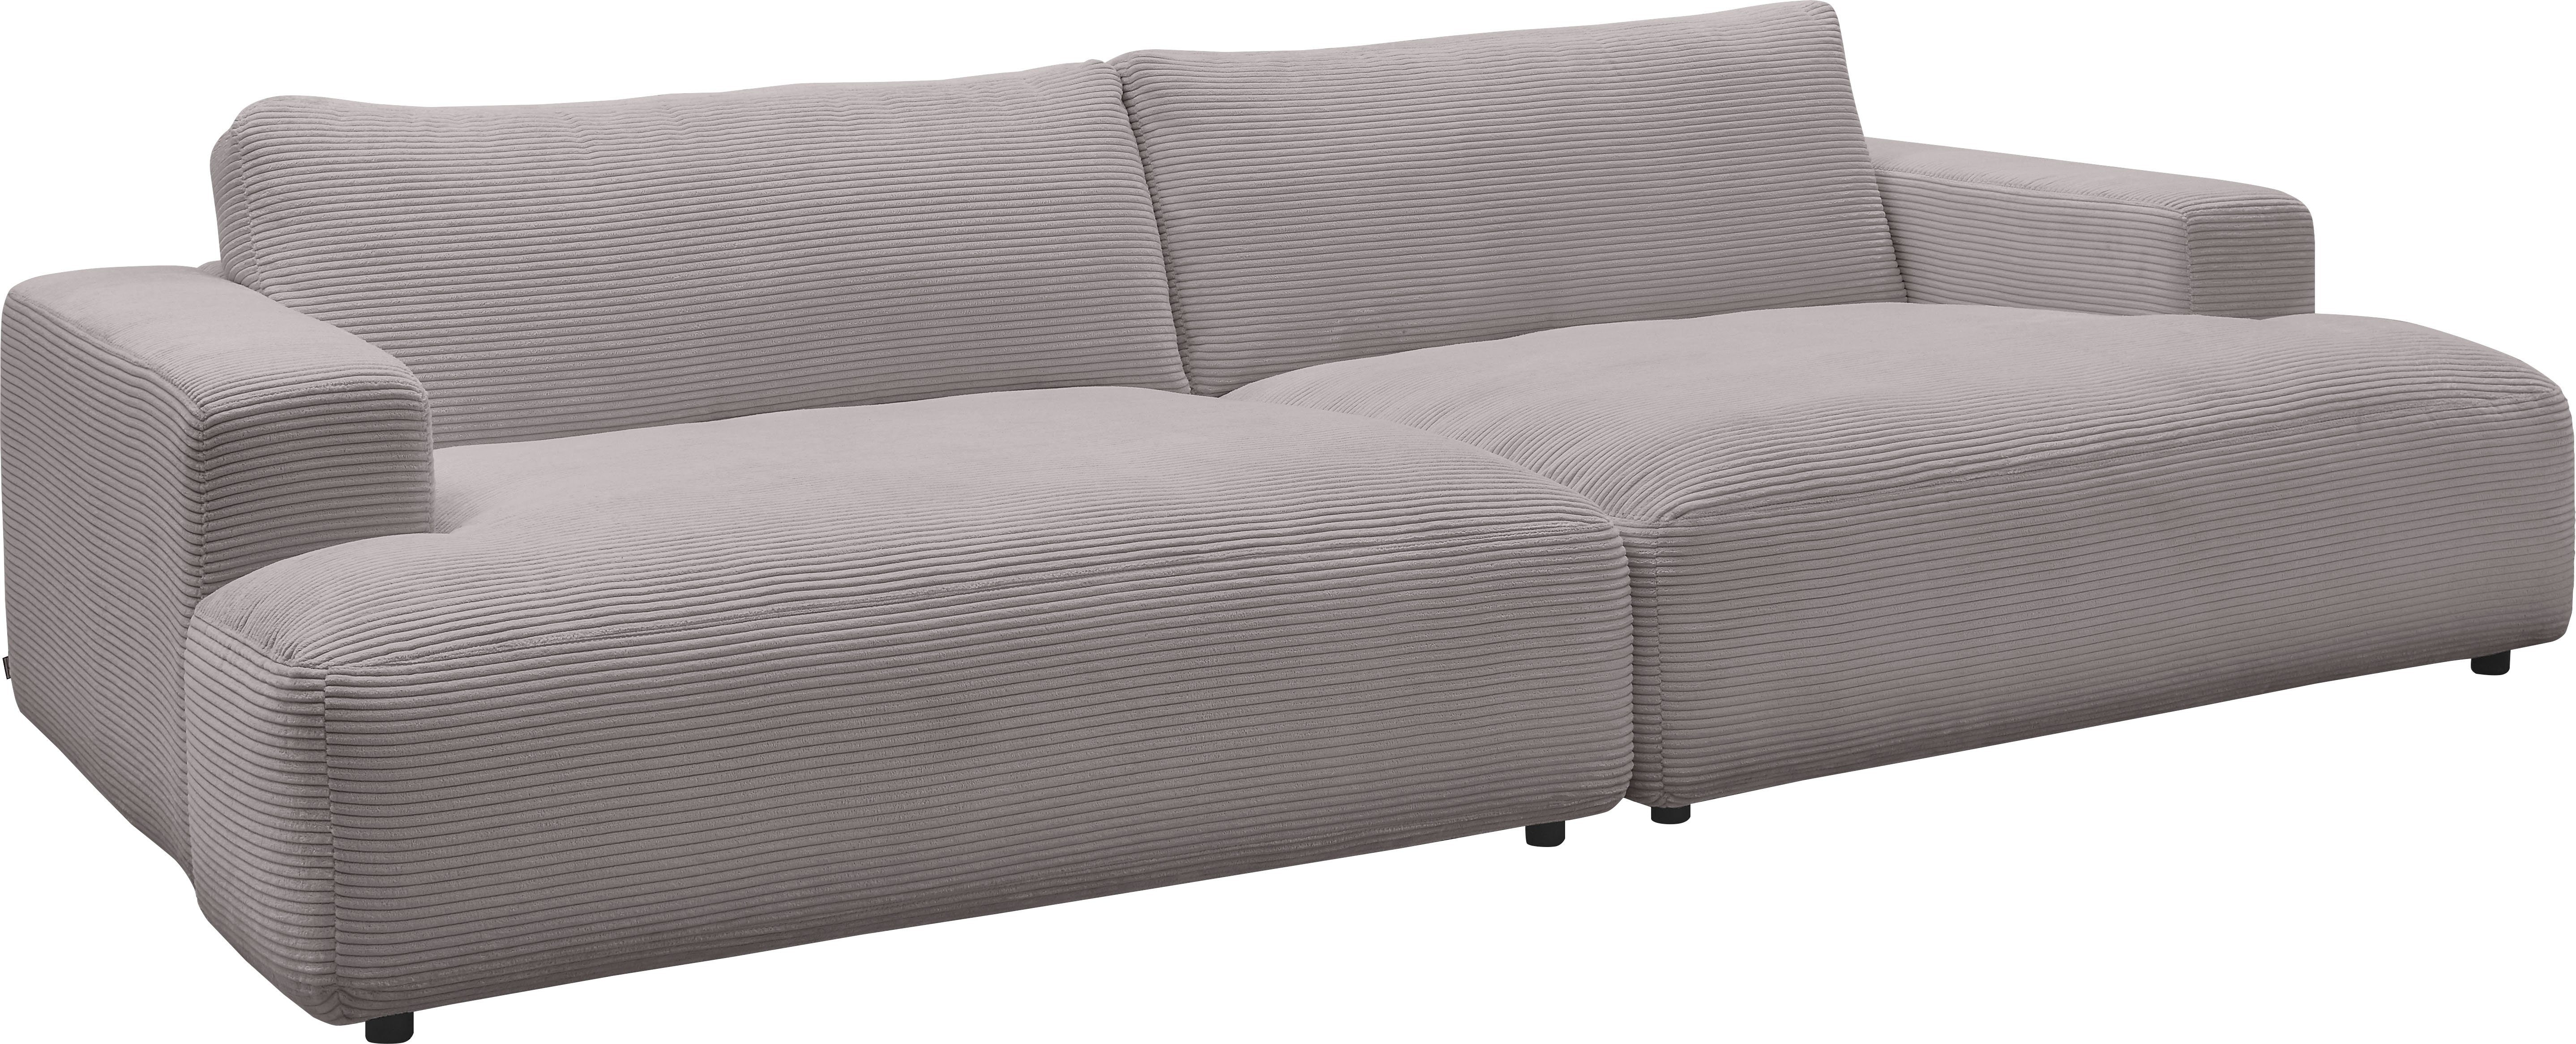 M by grey cm Cord-Bezug, Lucia, branded Loungesofa Breite Musterring 292 GALLERY